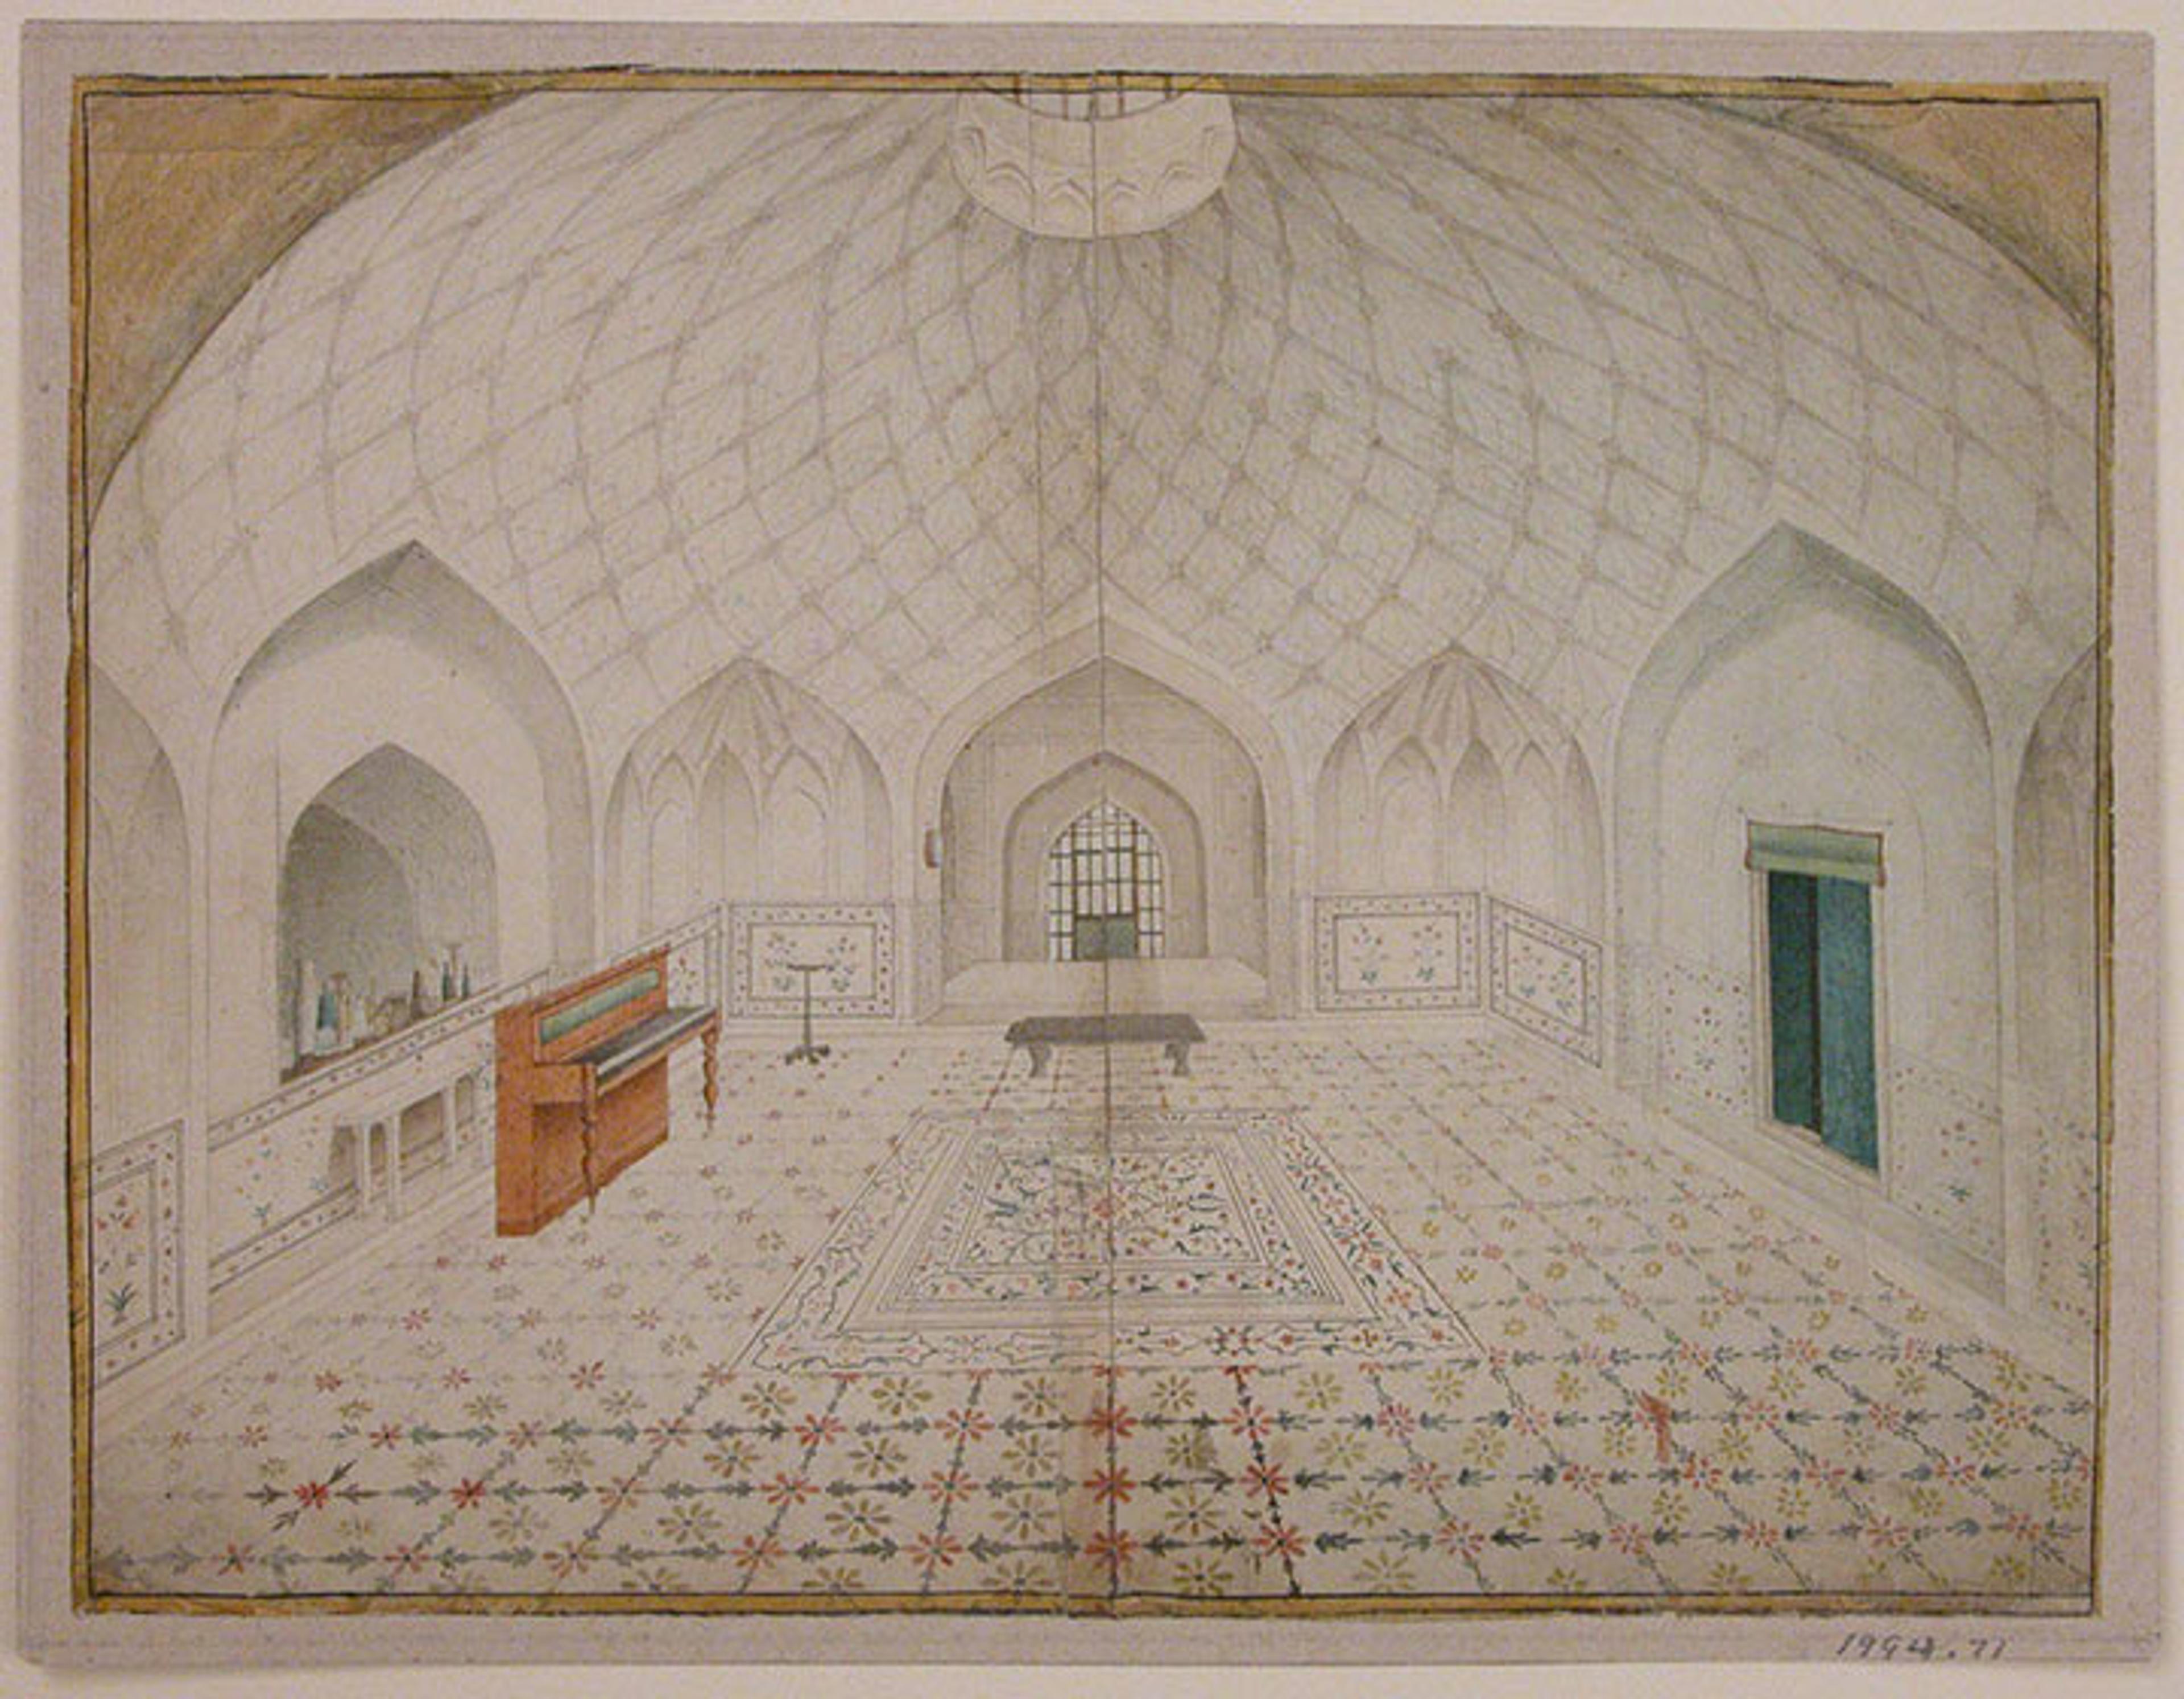 Watercolor of the interior of the bathhouse at the Red Fort, Delhi